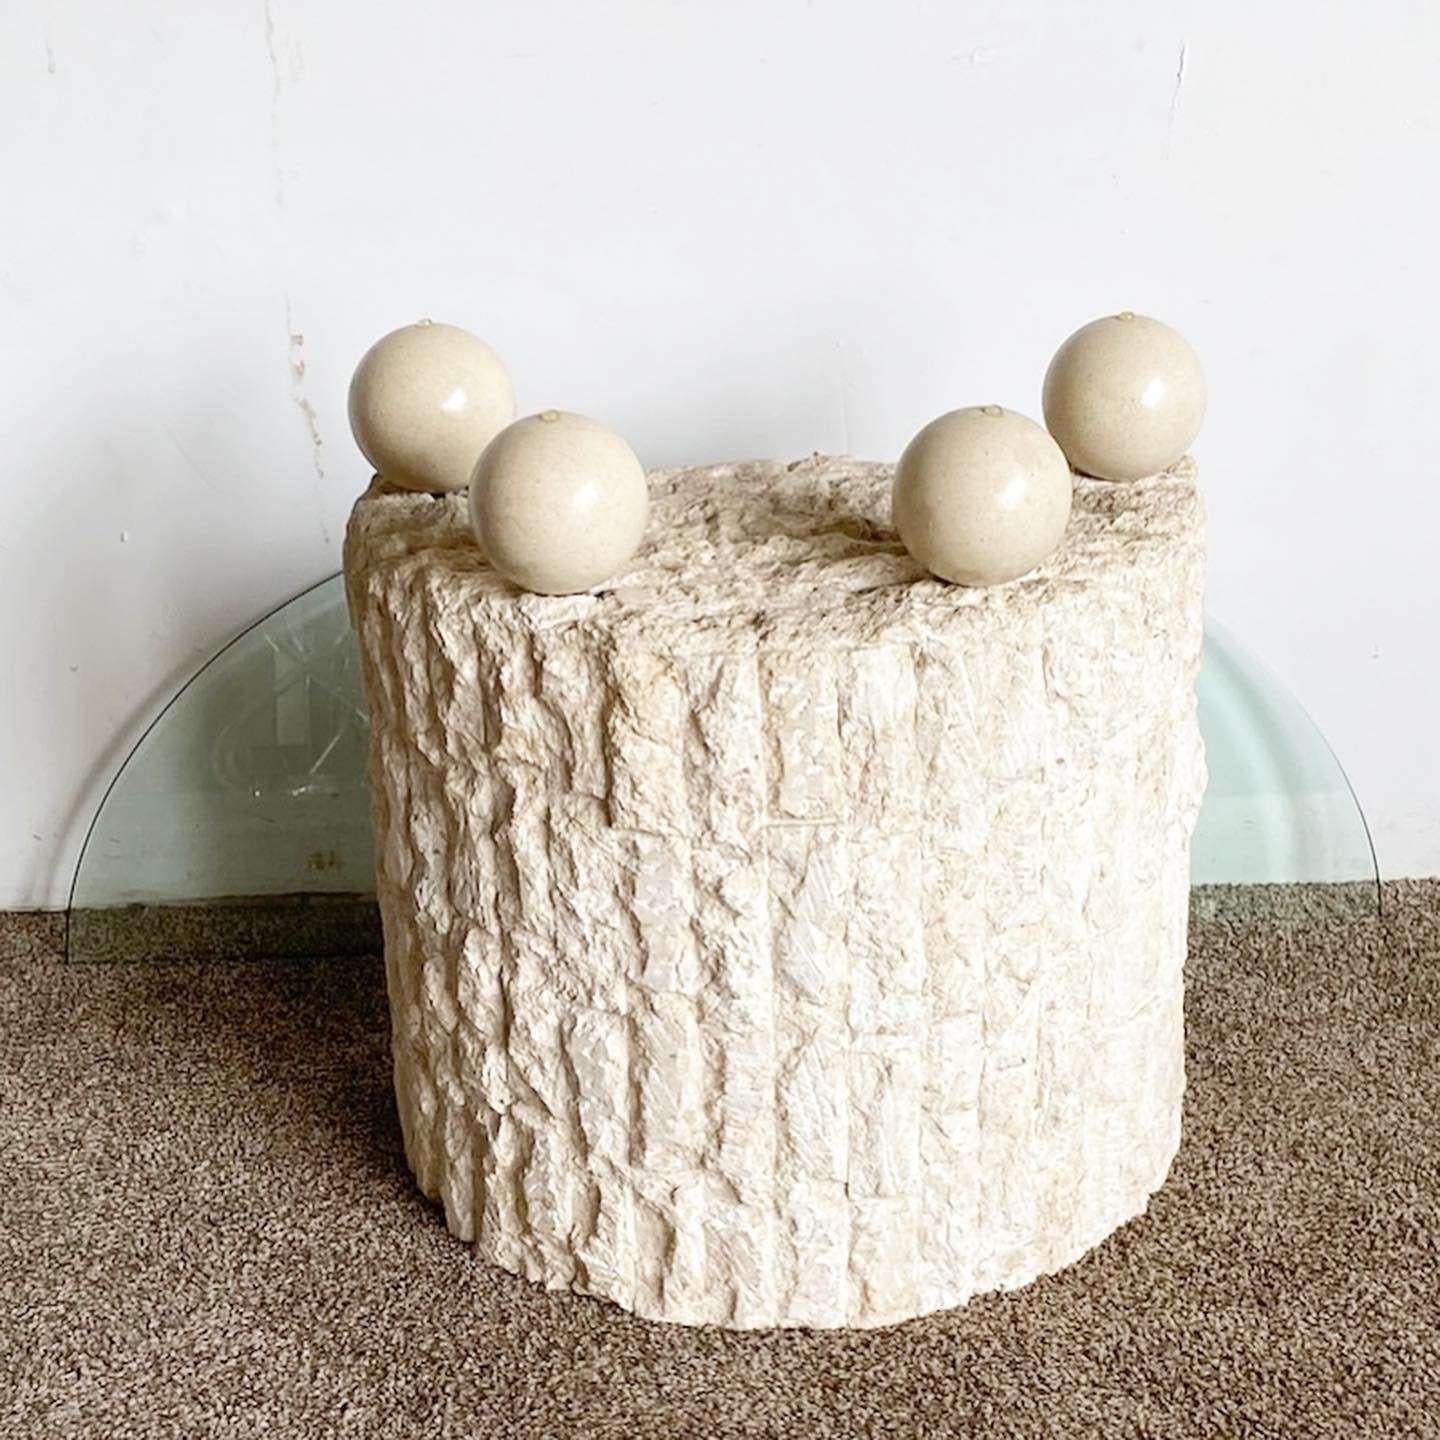 Exceptional vintage postmodern Demi lune, tessellated stone console table. Features a beveled glass top on three stone spheres.
